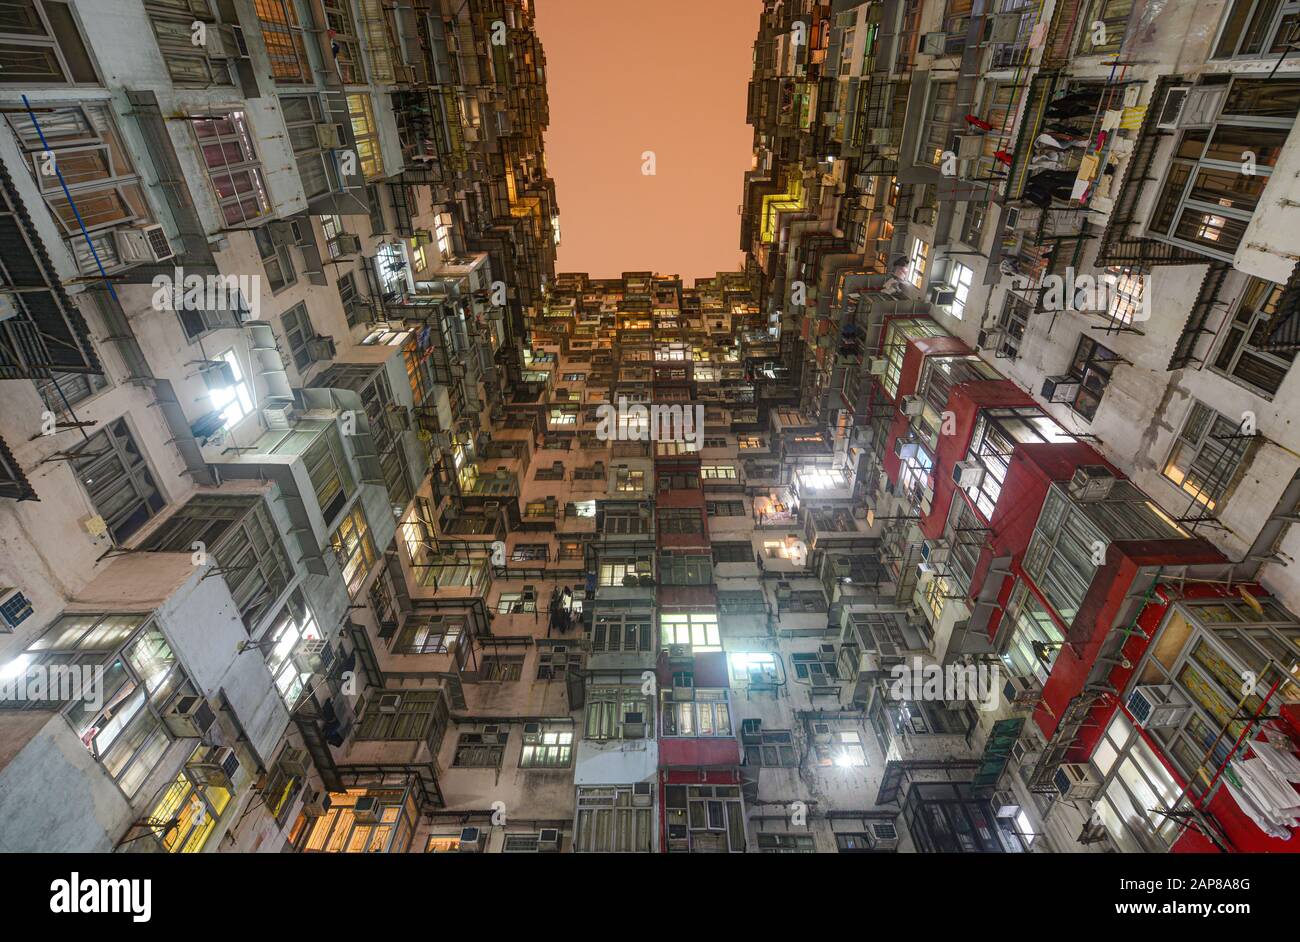 Hong Kong - March 10, 2019 - Crowded apartment homes in the Yick Fat, Yick Cheong, and Fok Cheong buildings at Montane Mansion Stock Photo